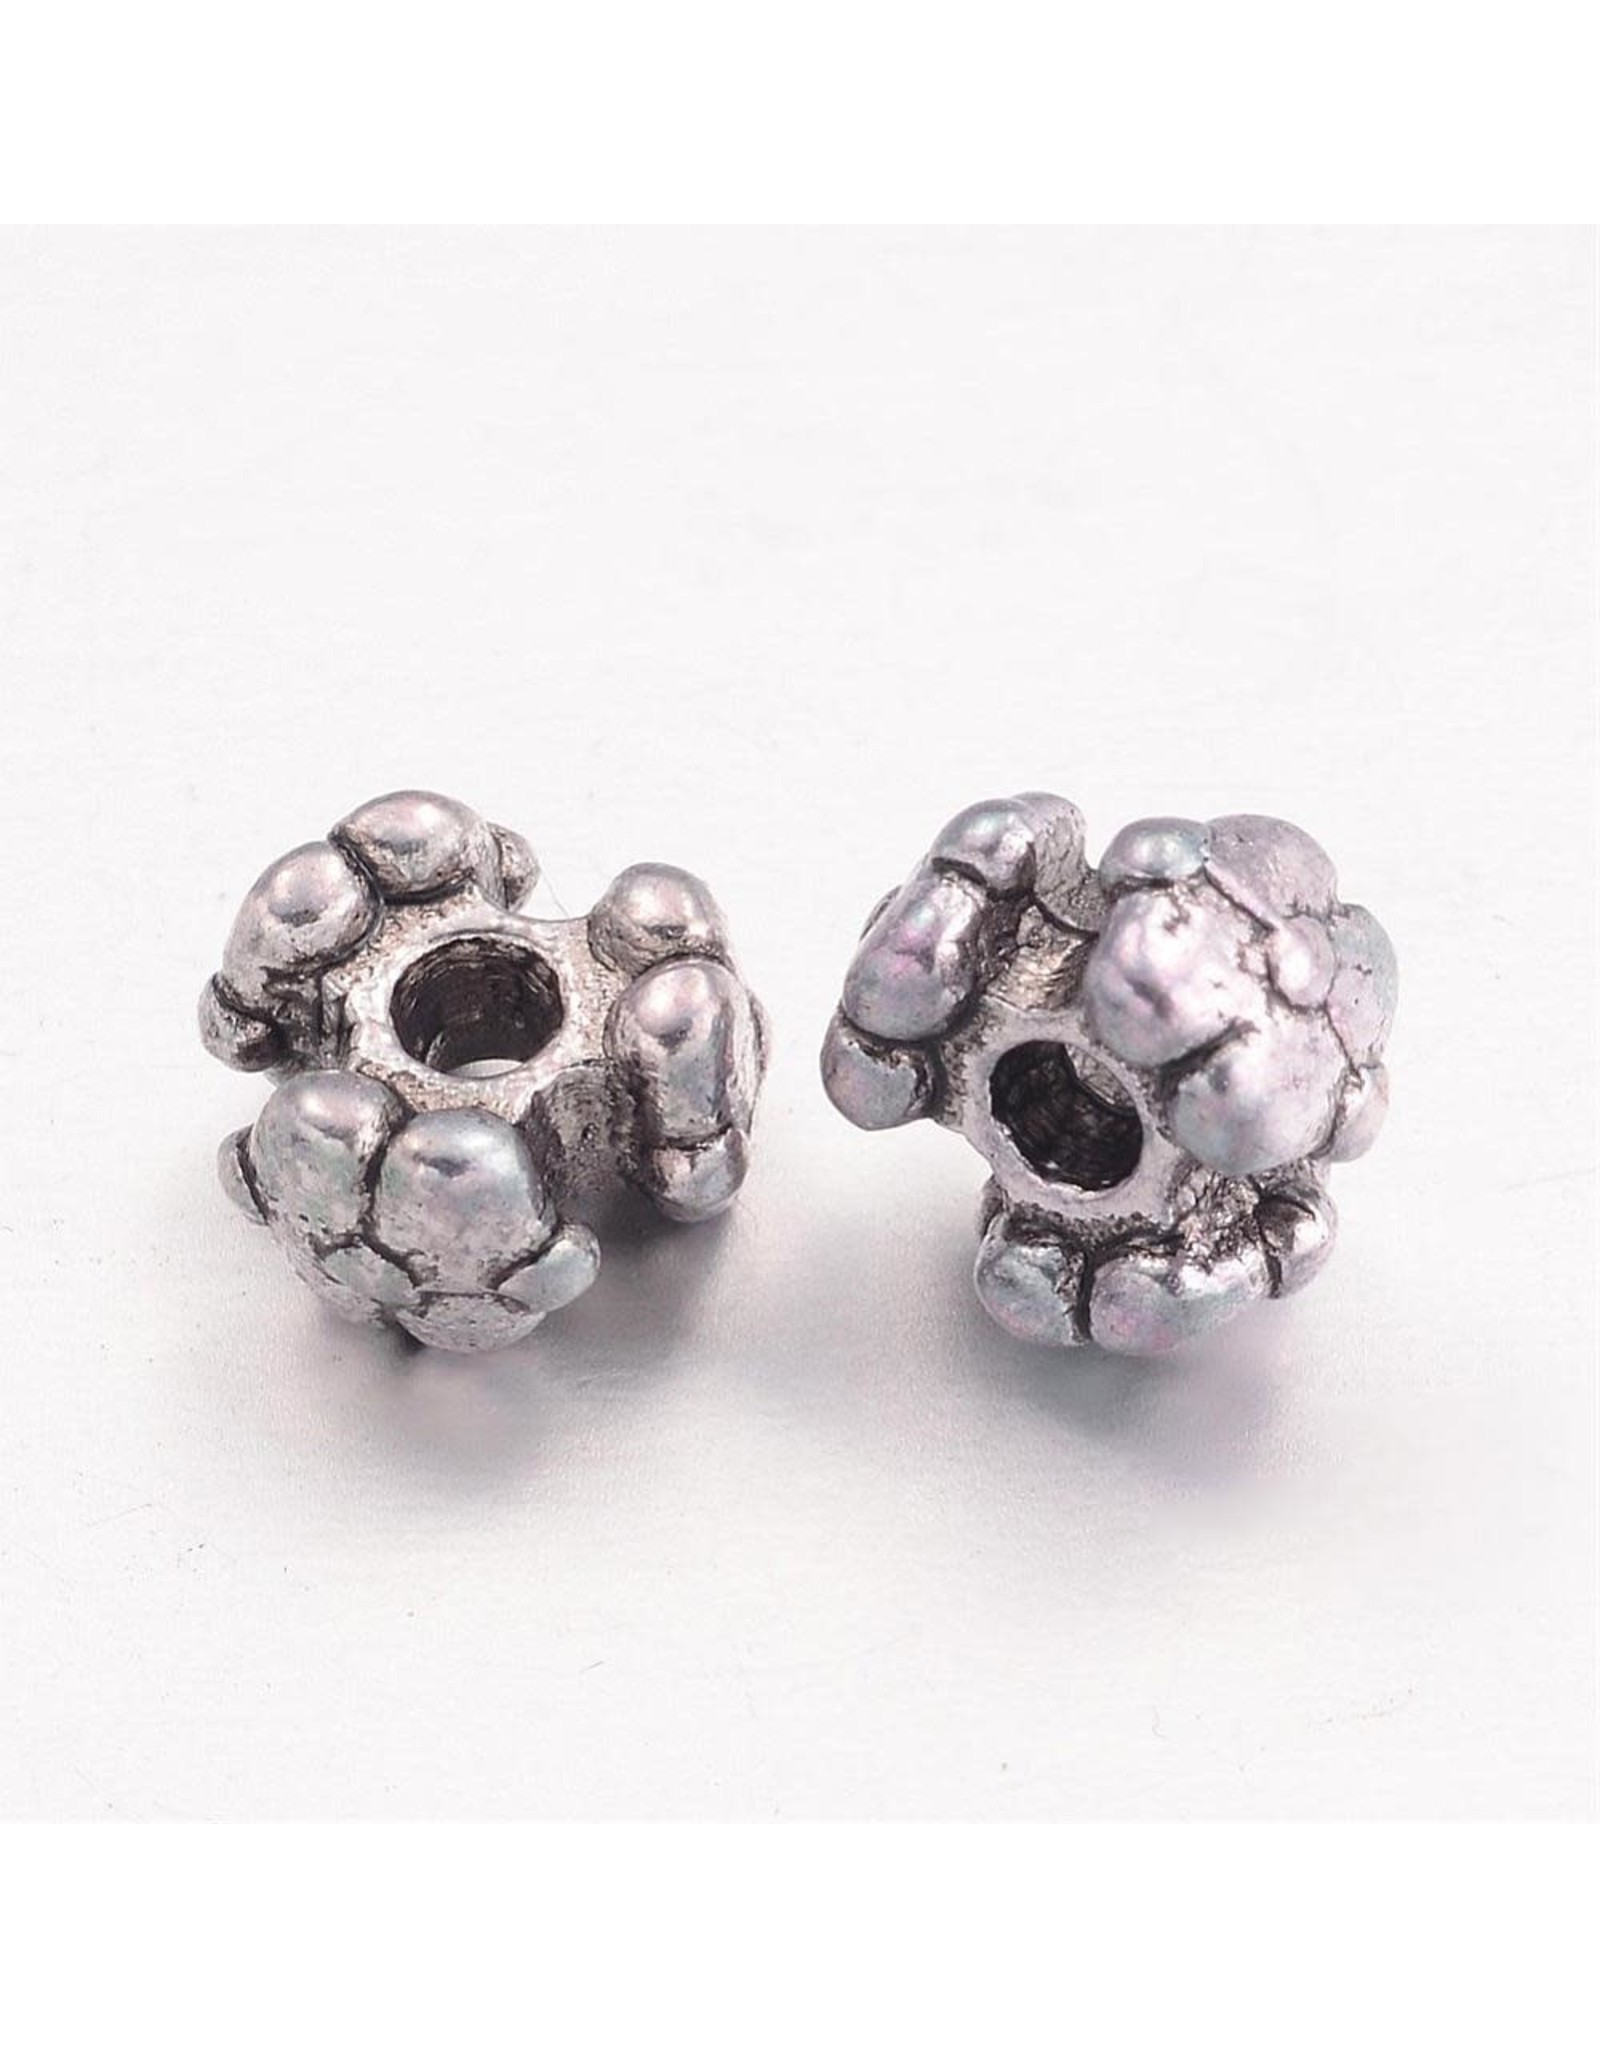 Tri Spacer Bead Antique Silver 6x4mm x100 NF